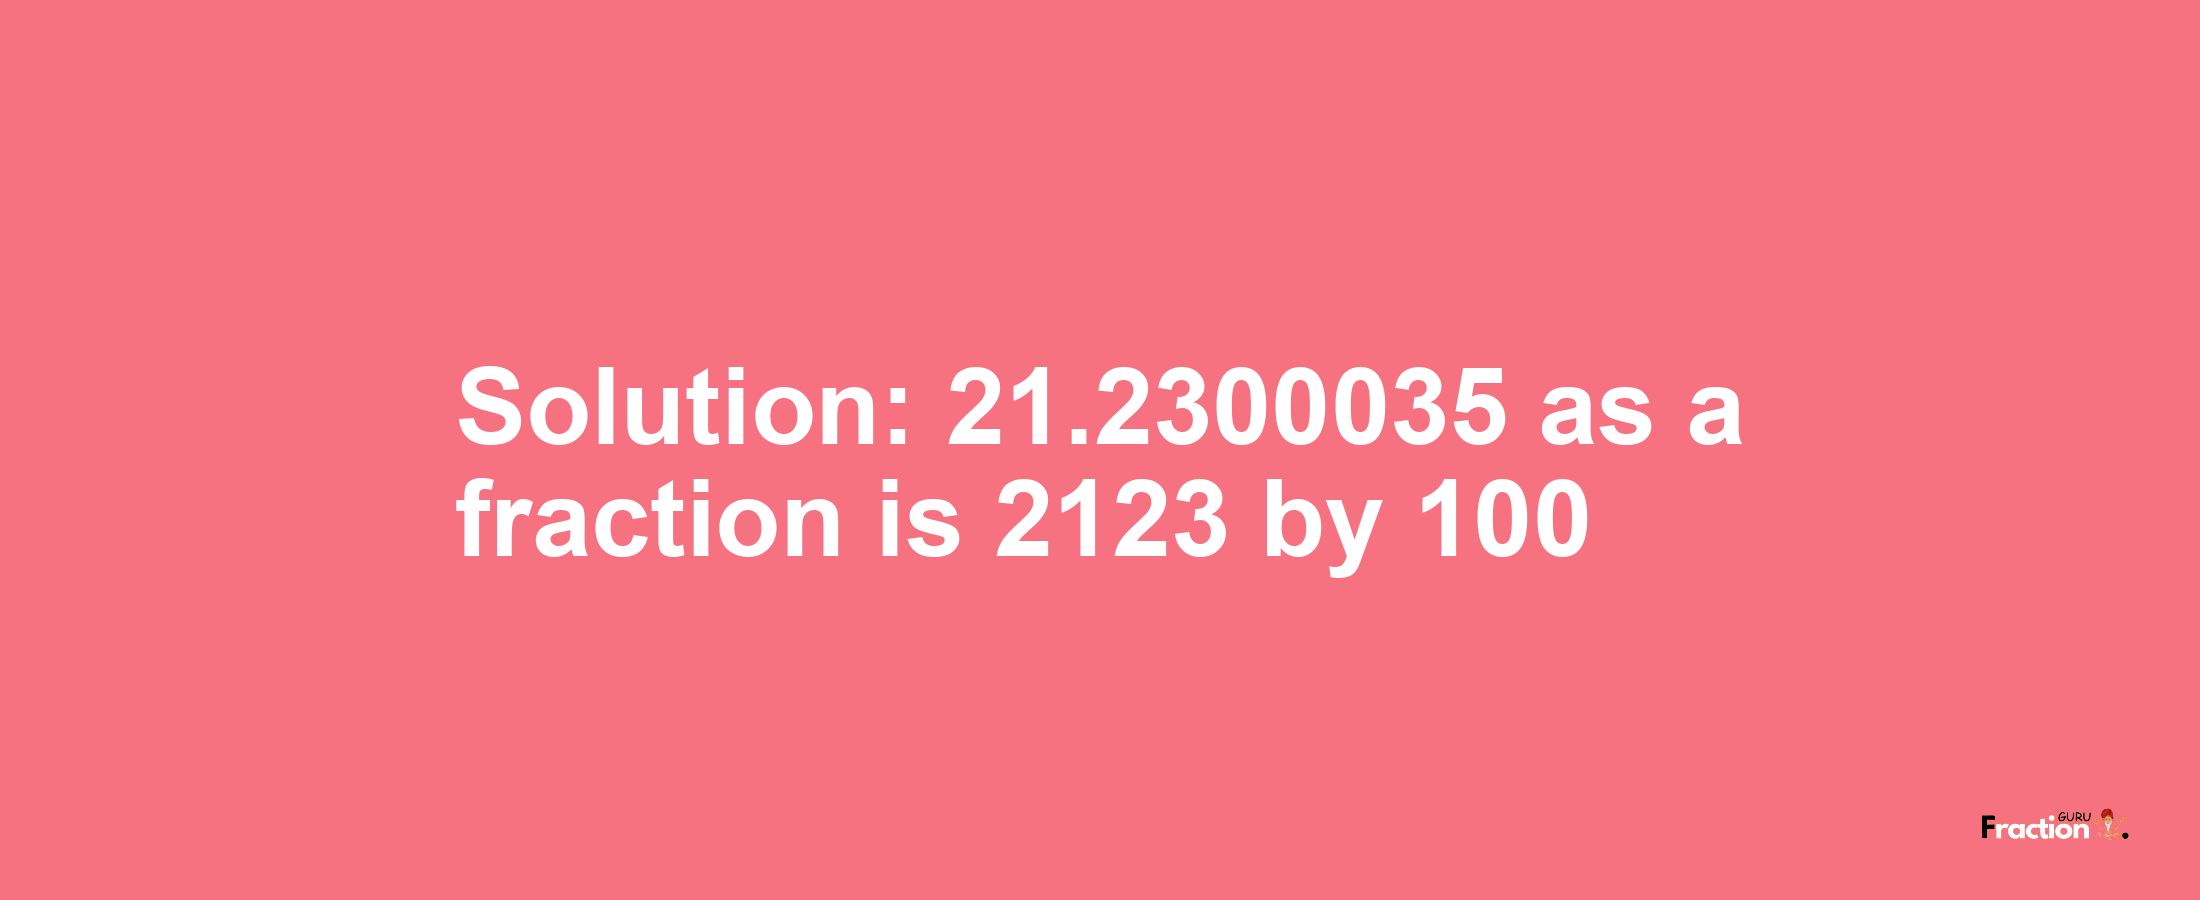 Solution:21.2300035 as a fraction is 2123/100